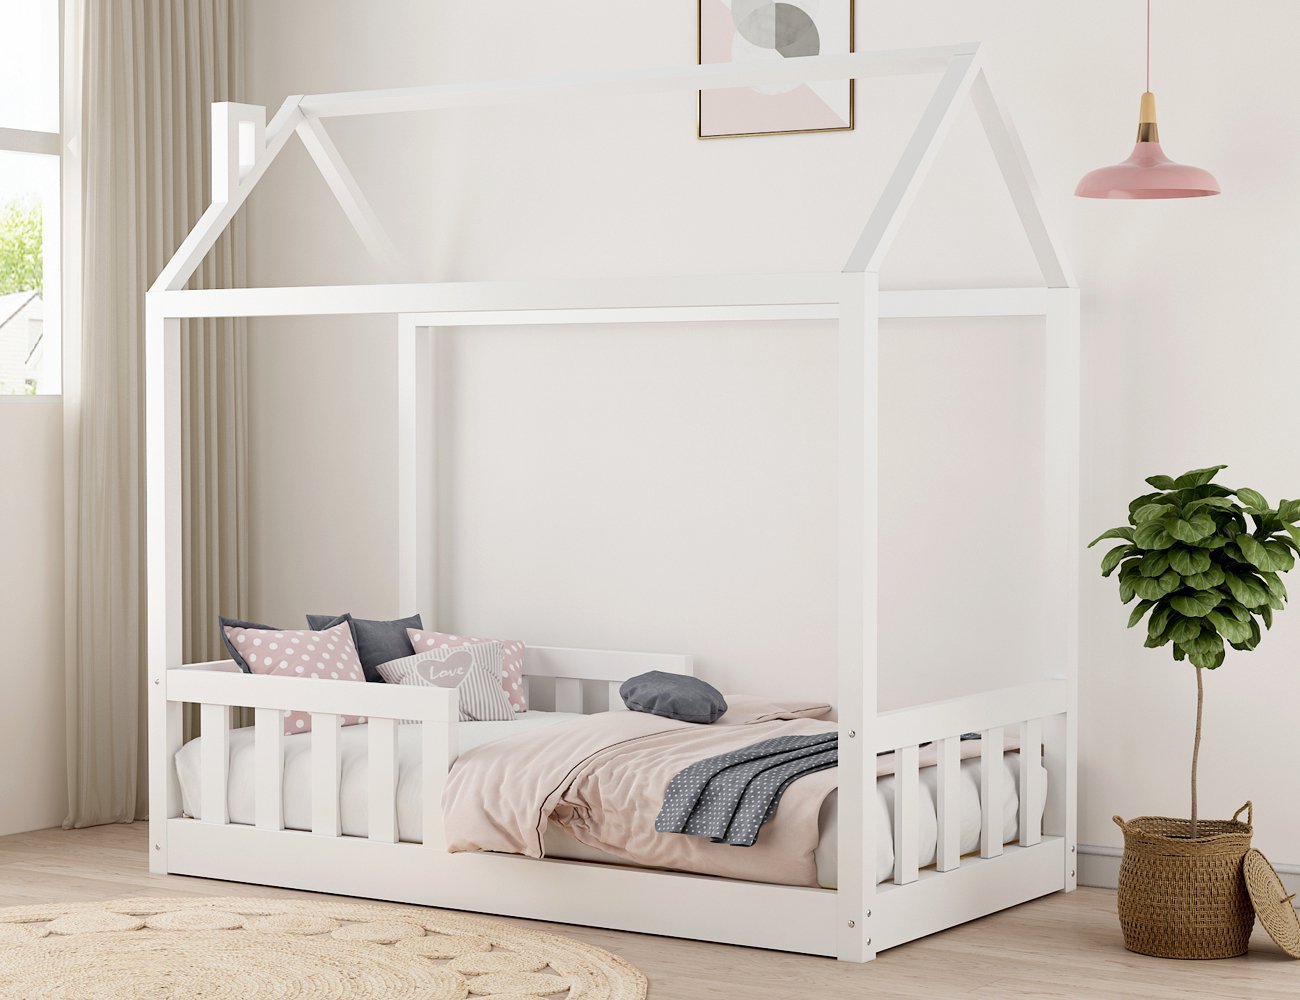 Ami Kids Single Bed Frame @ Crazy Sales - We have the best daily deals ...